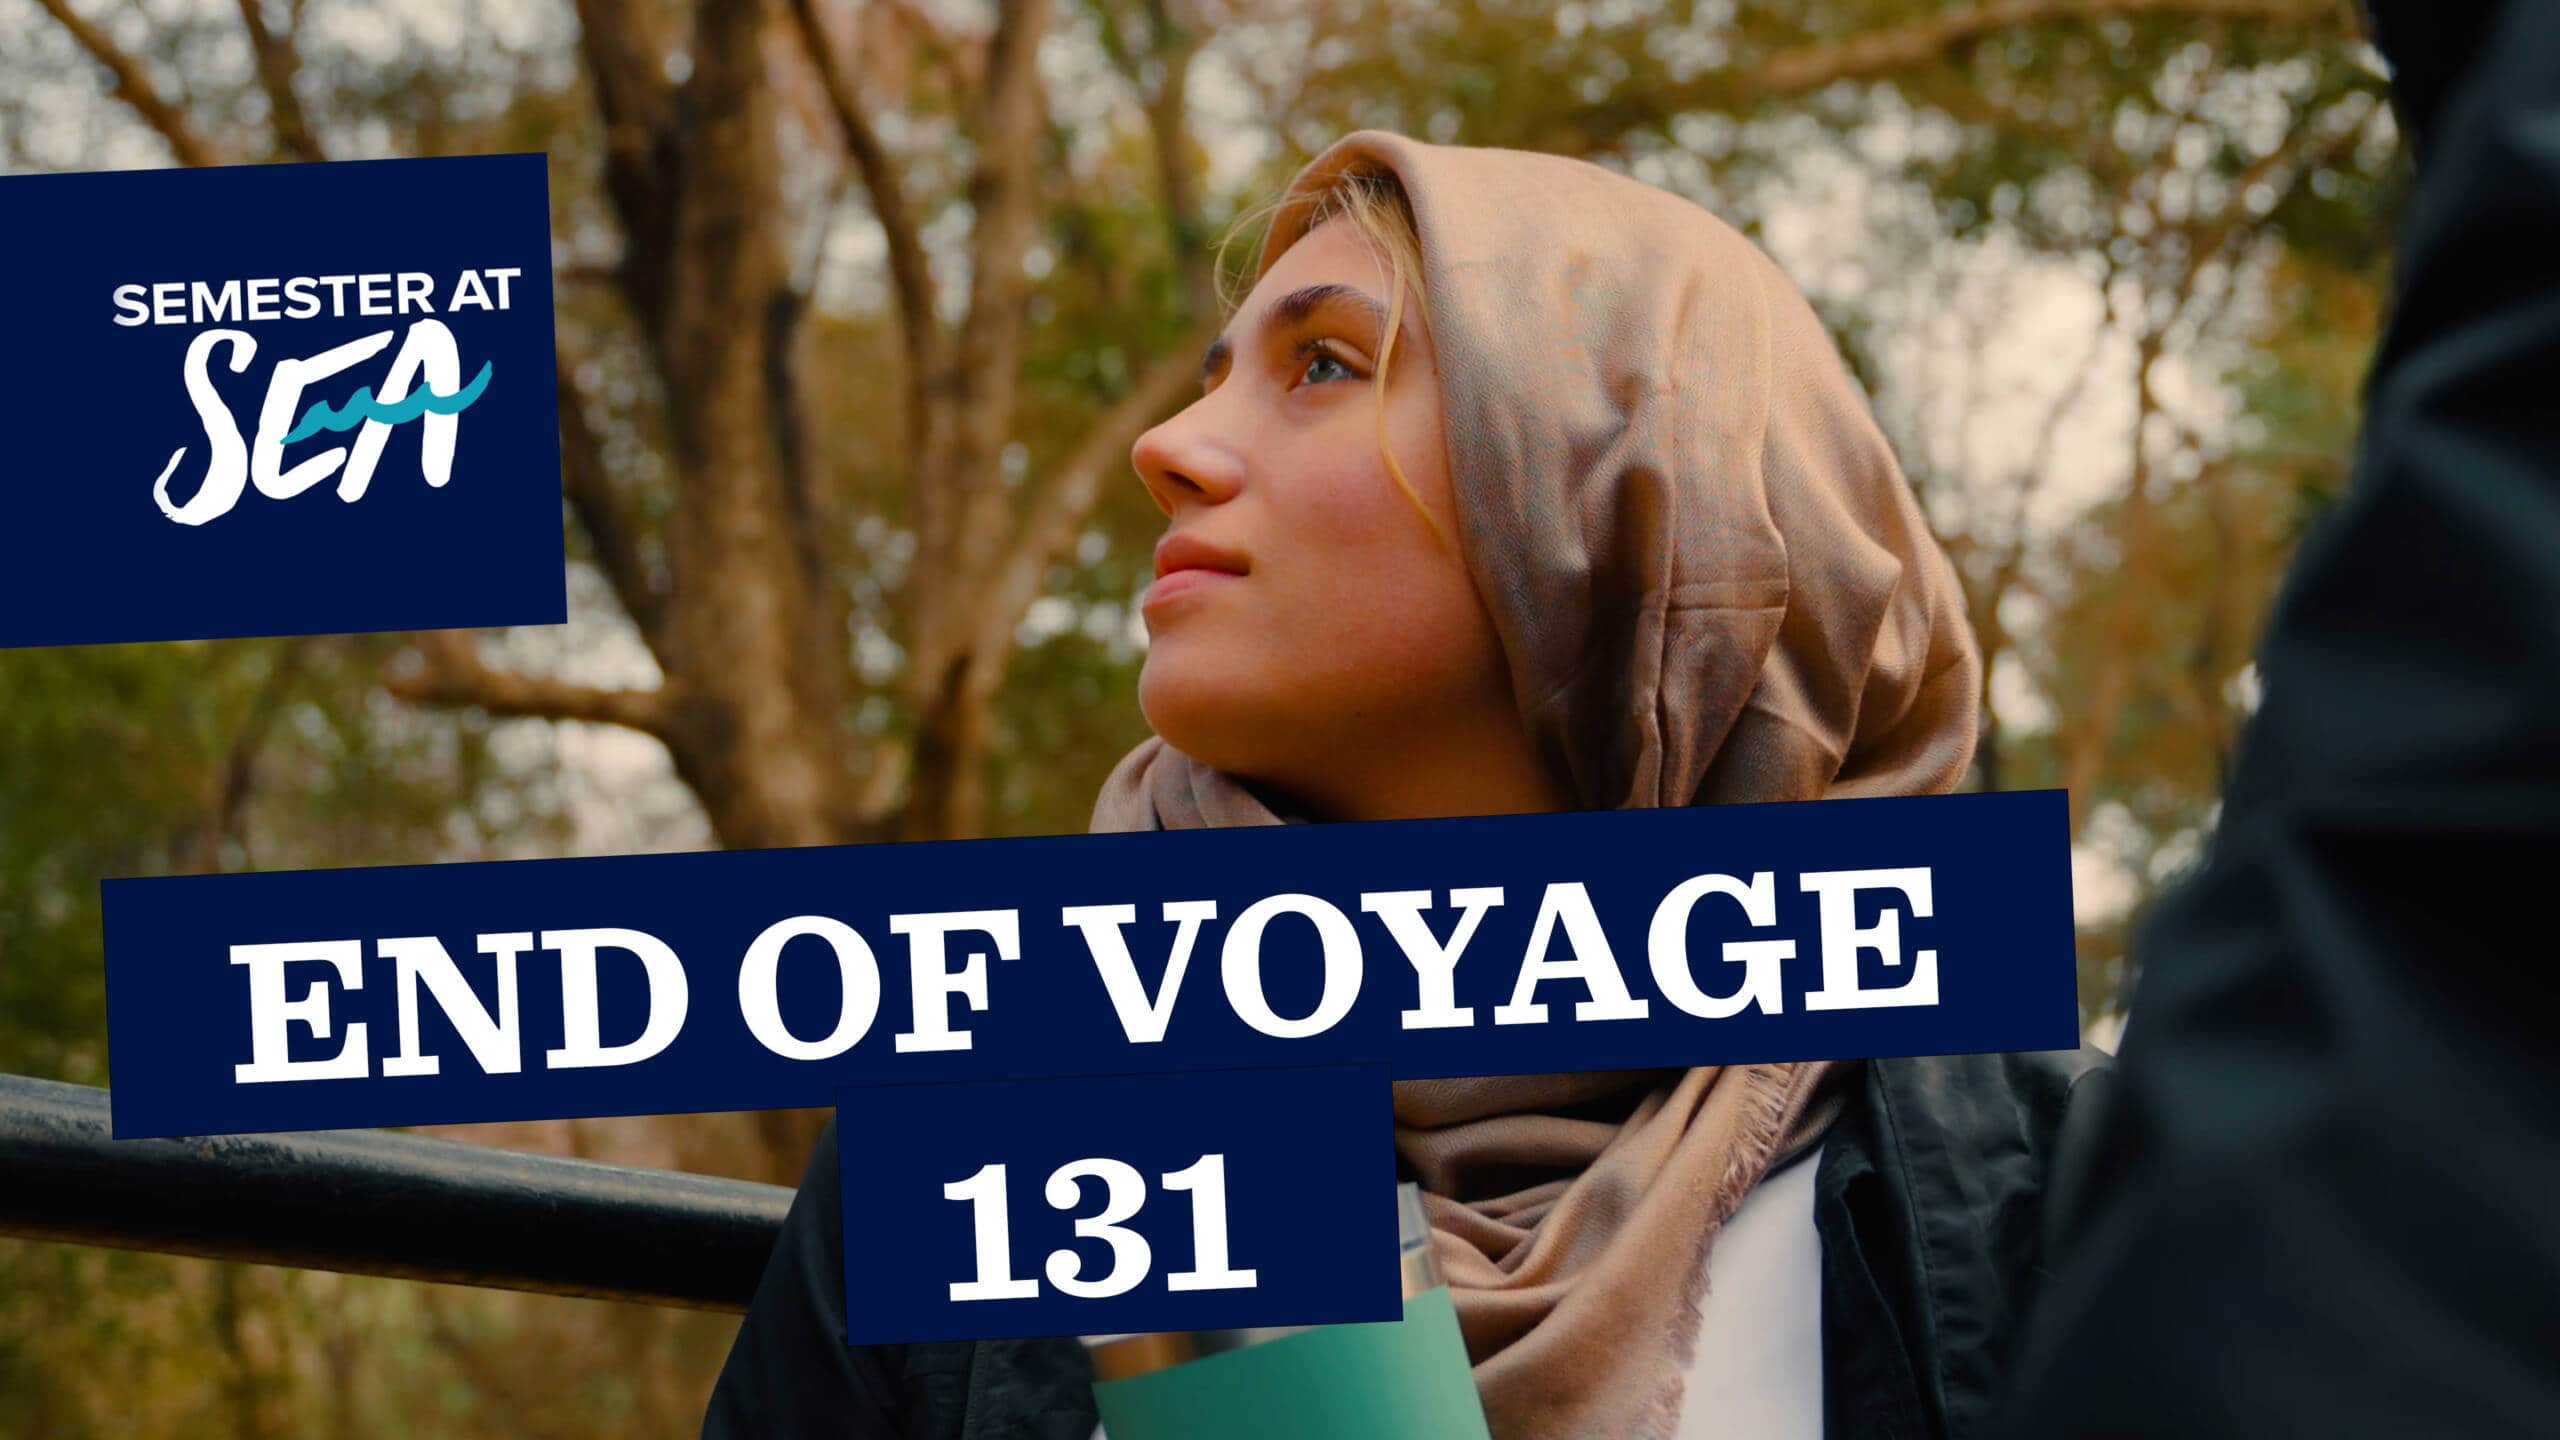 Voyage of the Four Seas Codes - December 2023 